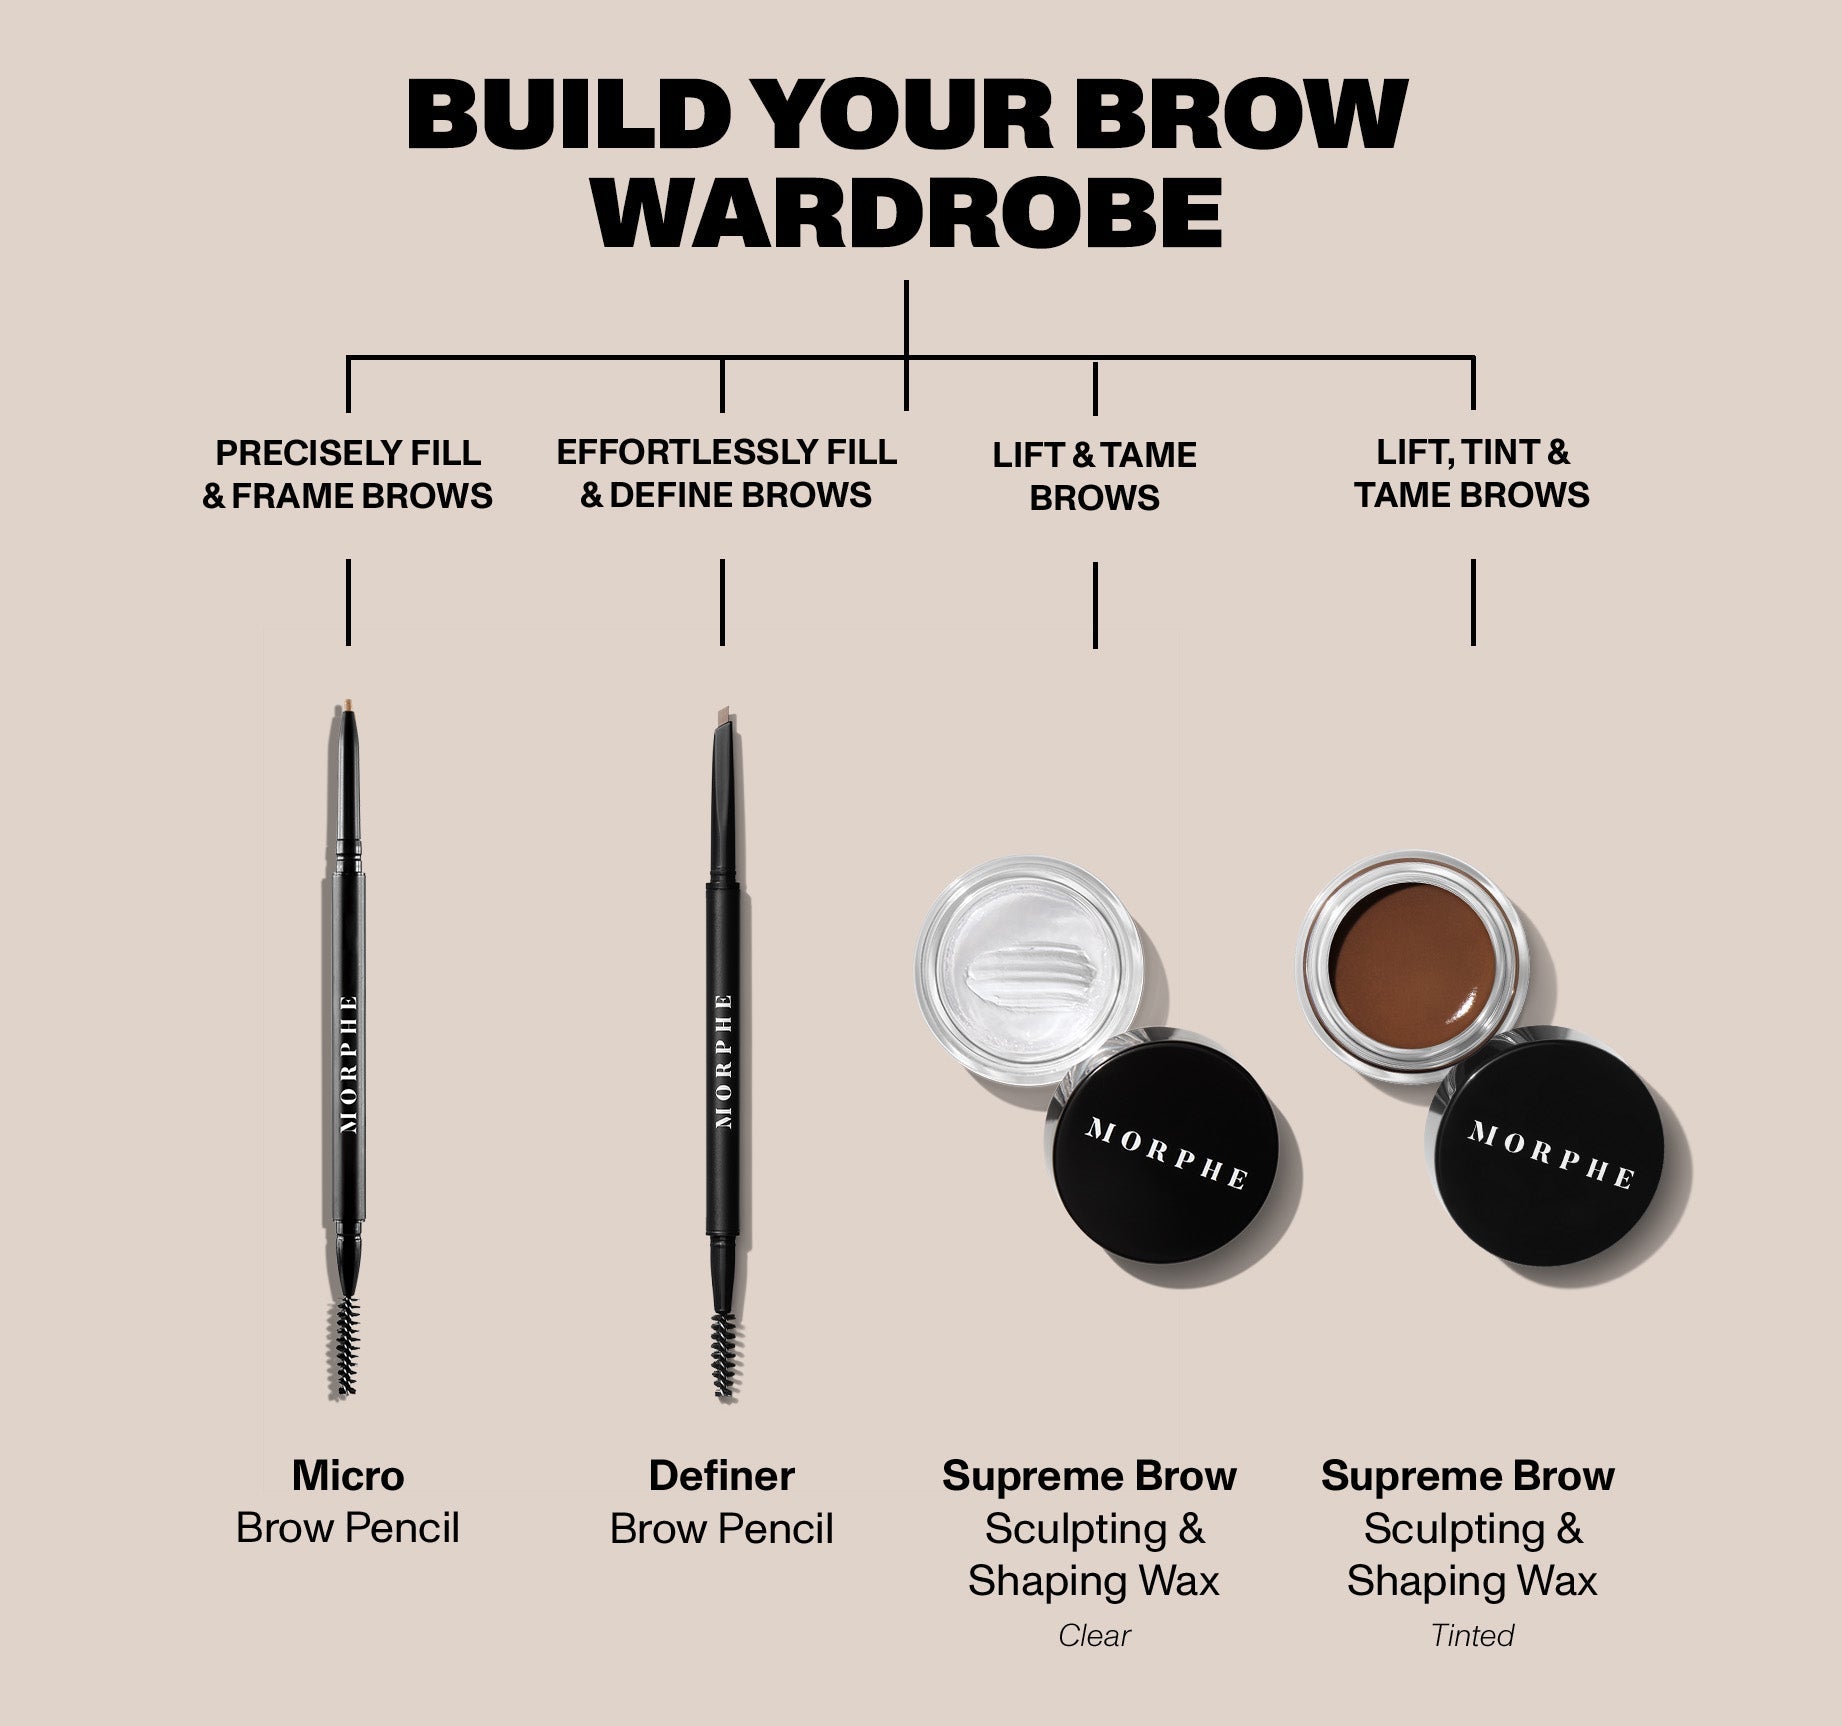 Supreme Brow Sculpting And Shaping Wax - Biscotti - Image 9